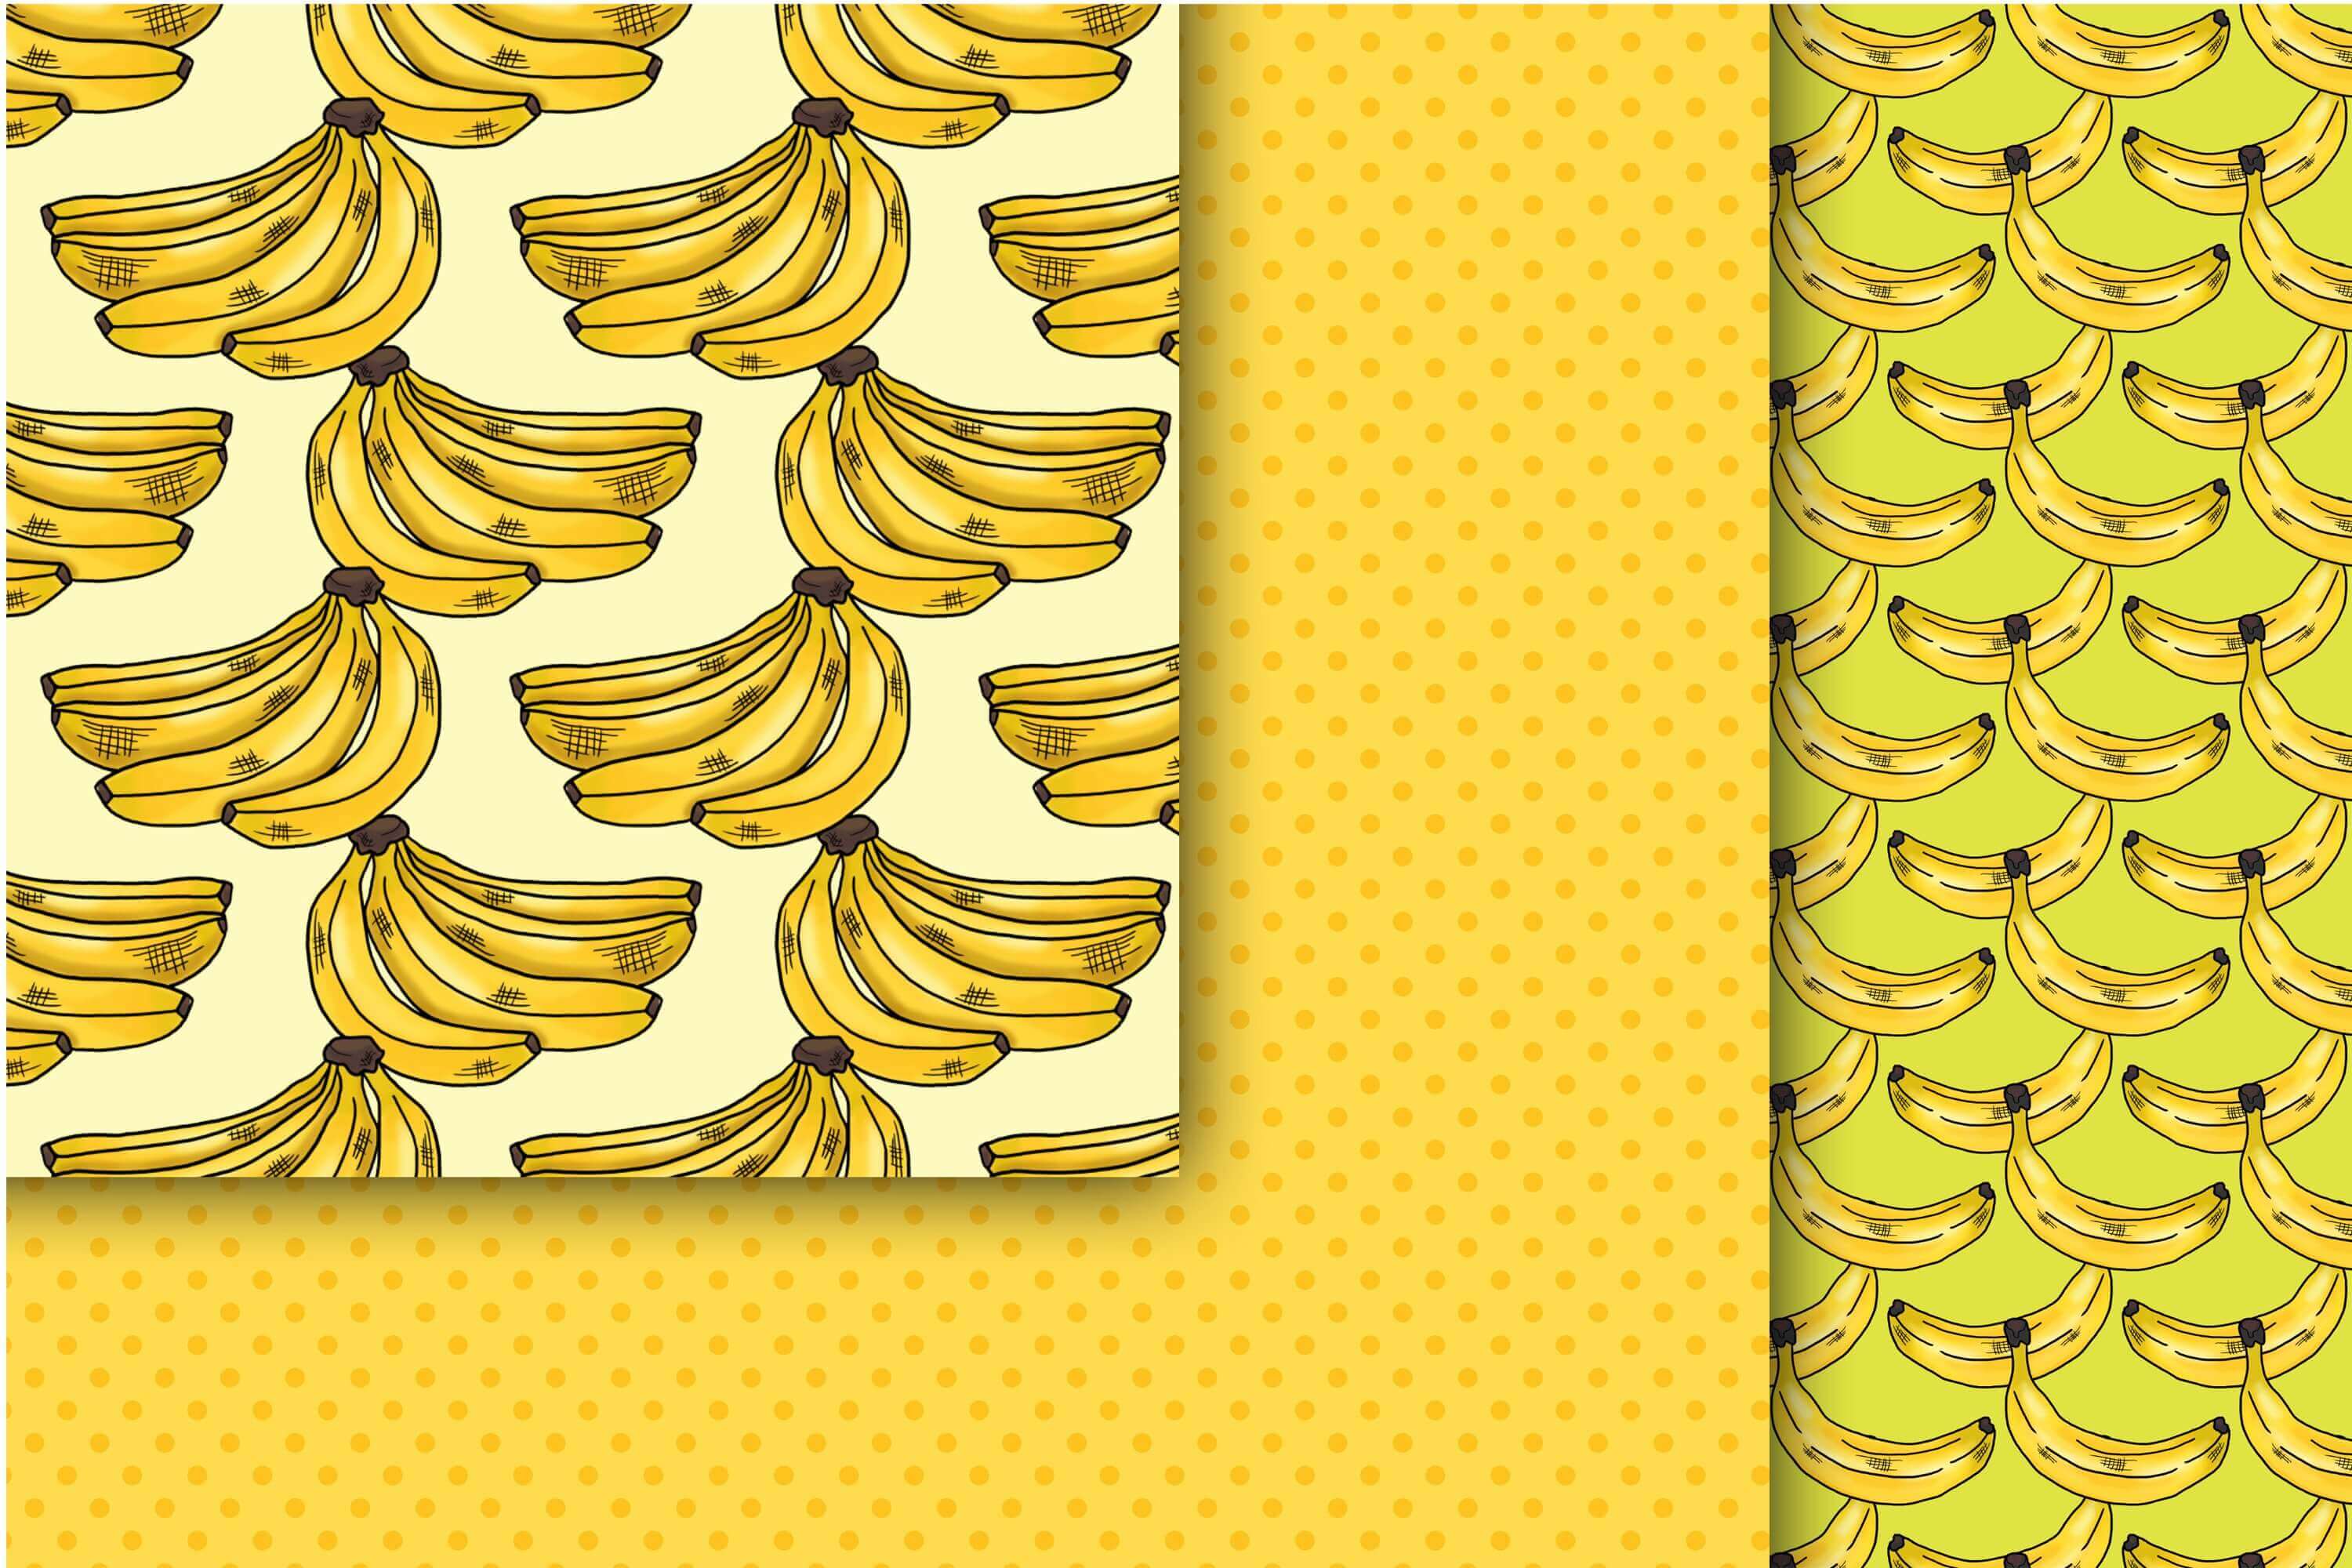 Patterns with the image of bananas on white and yellow backgrounds.